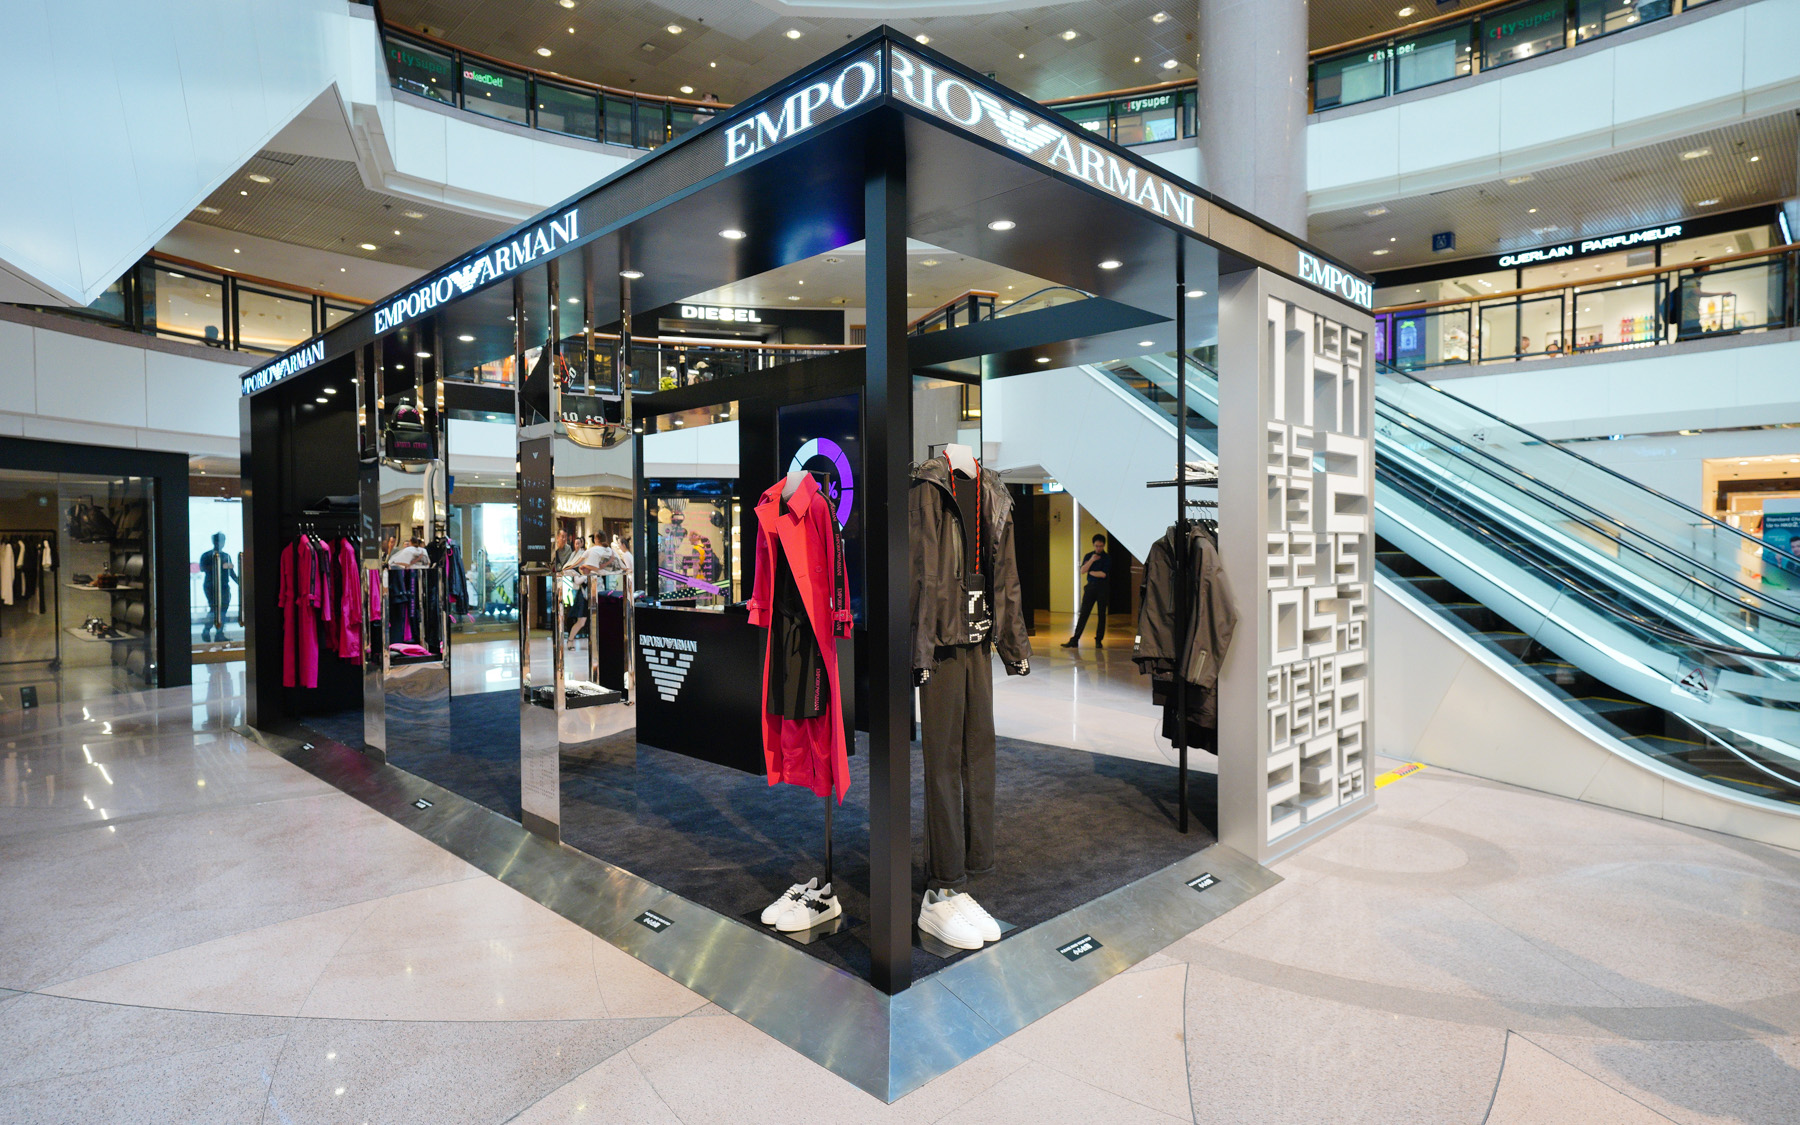 Emporio Armani Capsule Collection Pop-Up Store at Harbour City – Harbour City